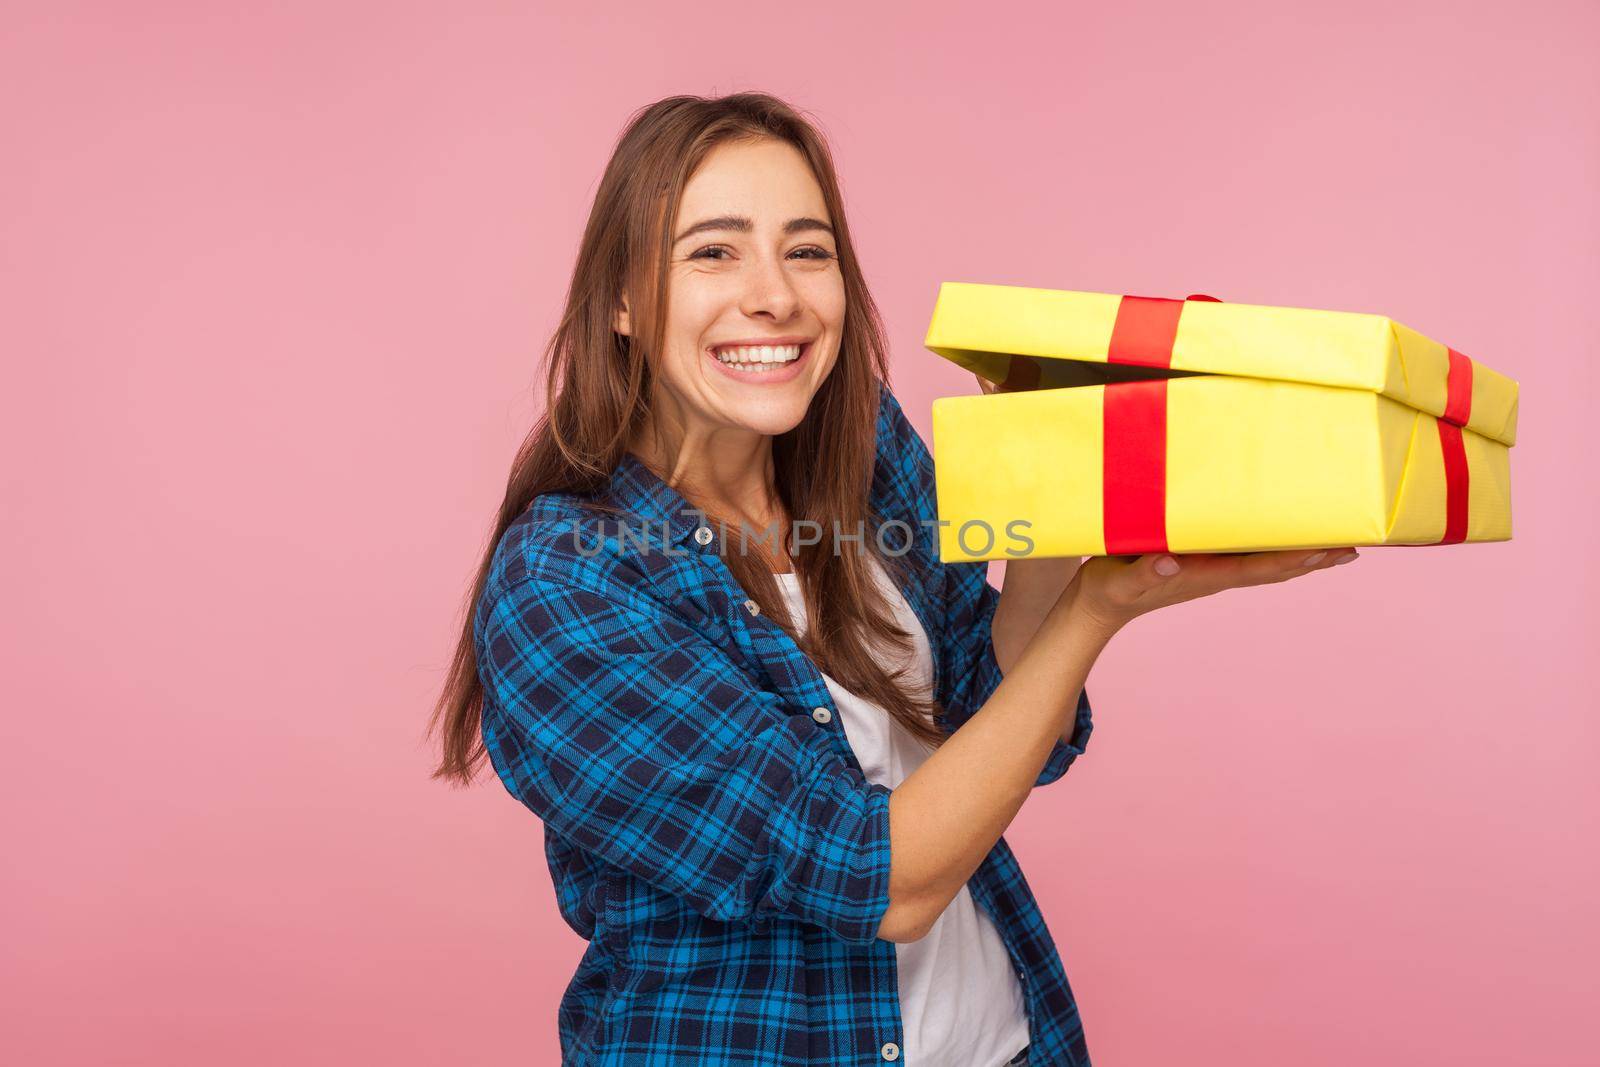 Nice holiday present, bonus. Portrait of happy beautiful girl in checkered shirt holding unwrapped box and looking at camera with toothy smile, excited about birthday gift. indoor studio shot isolated